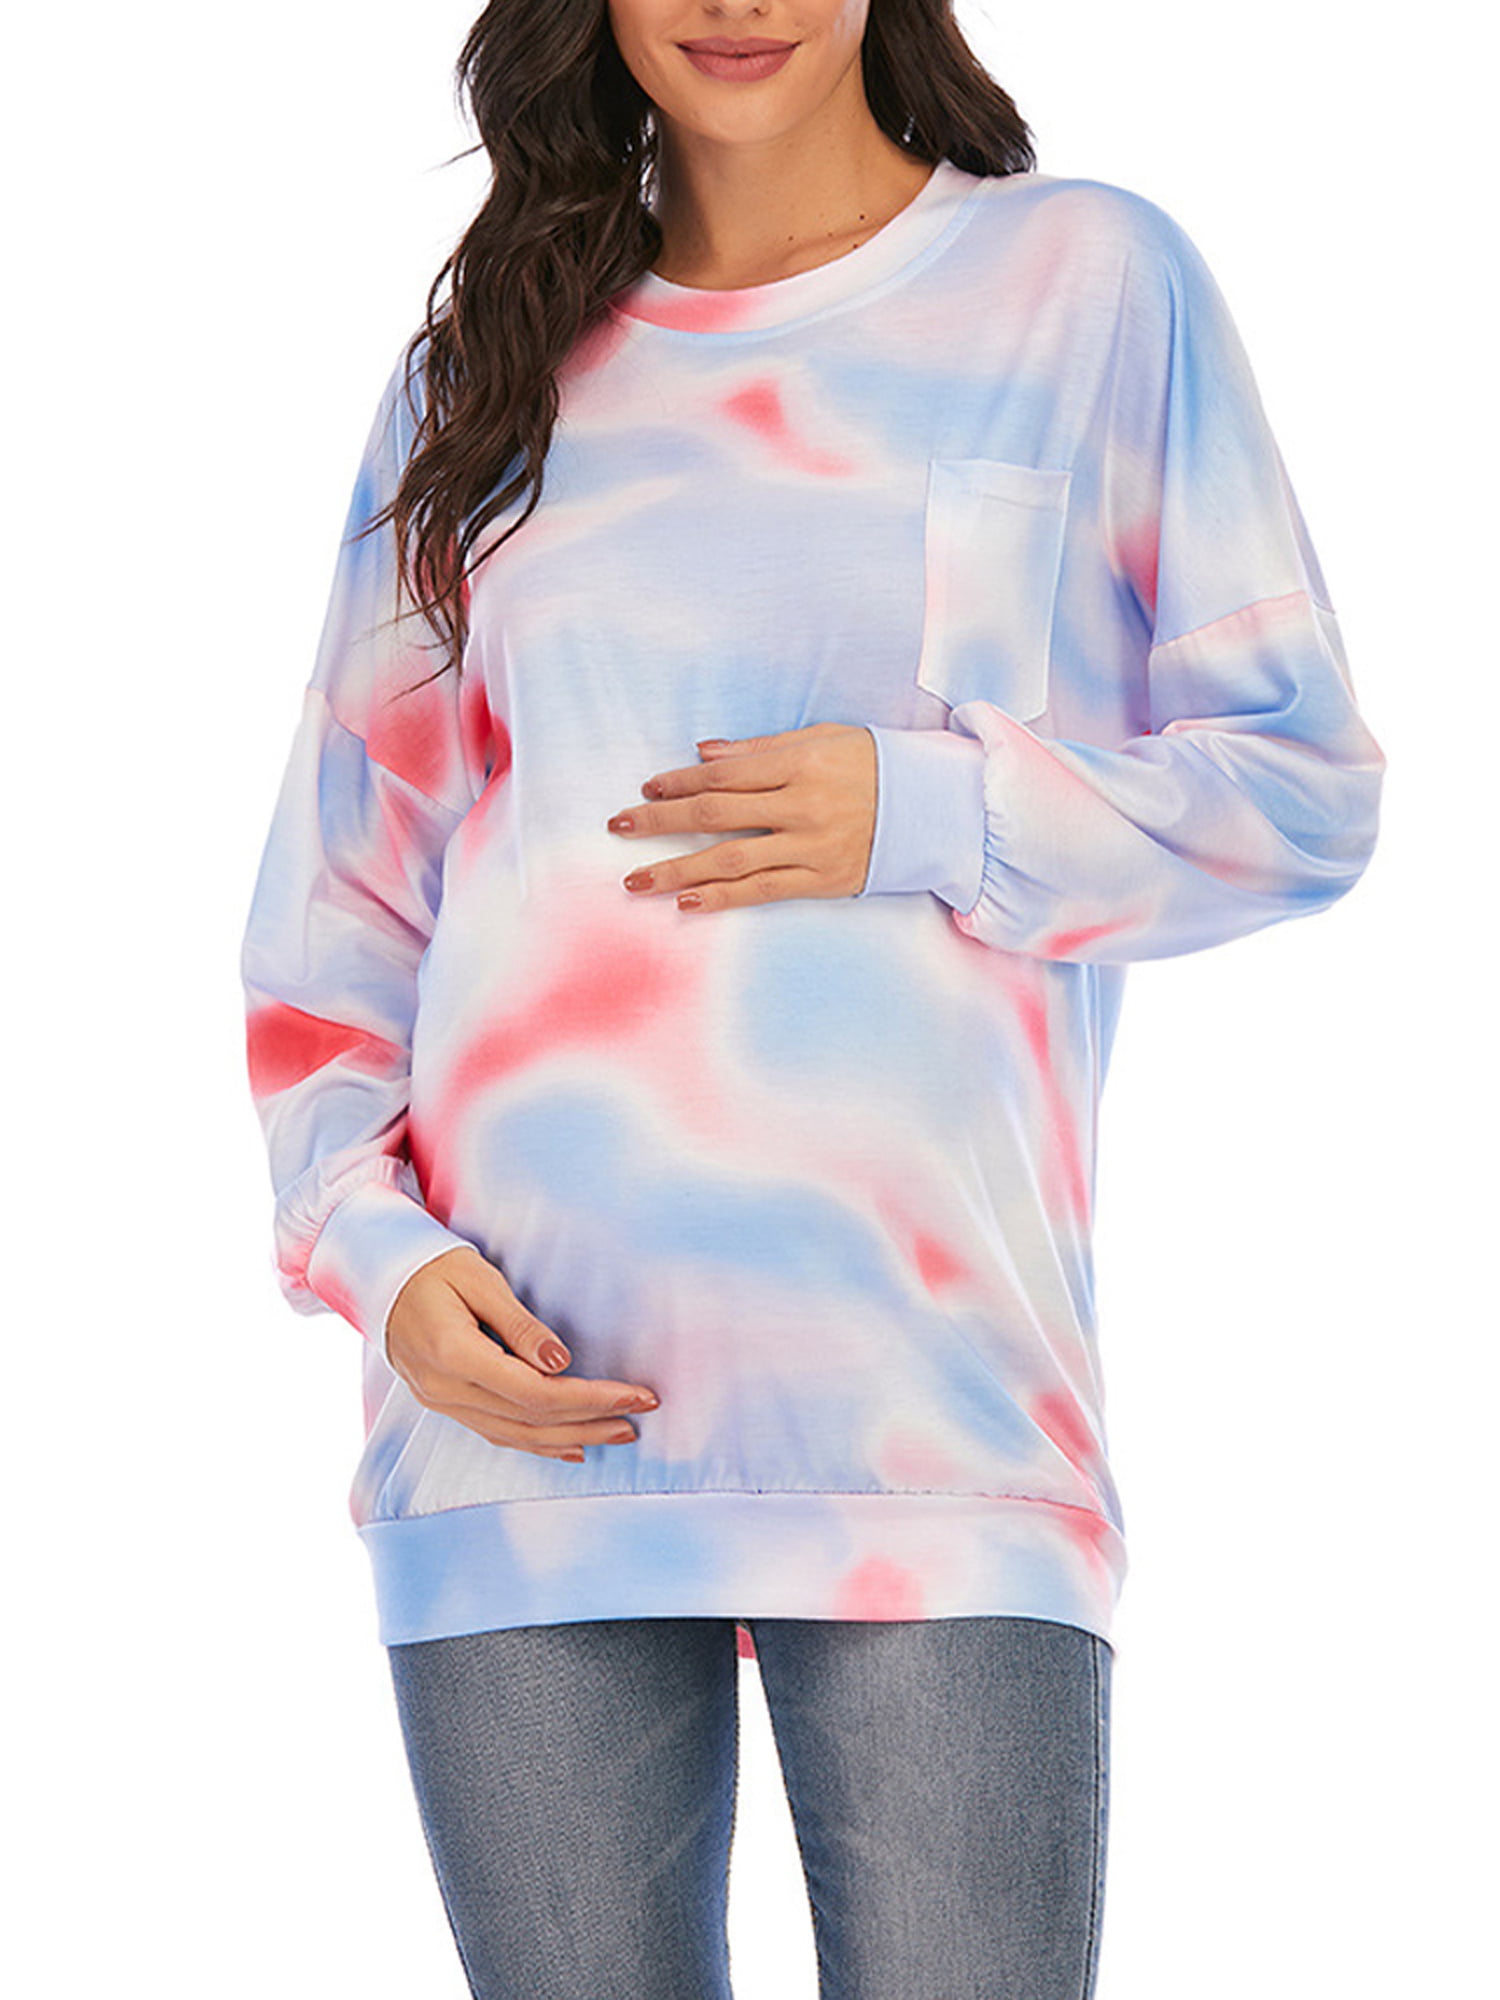 Pregnant Women Maternity Tunic Tops Long Sleeve Pullover Casual Blouse T Shirt 